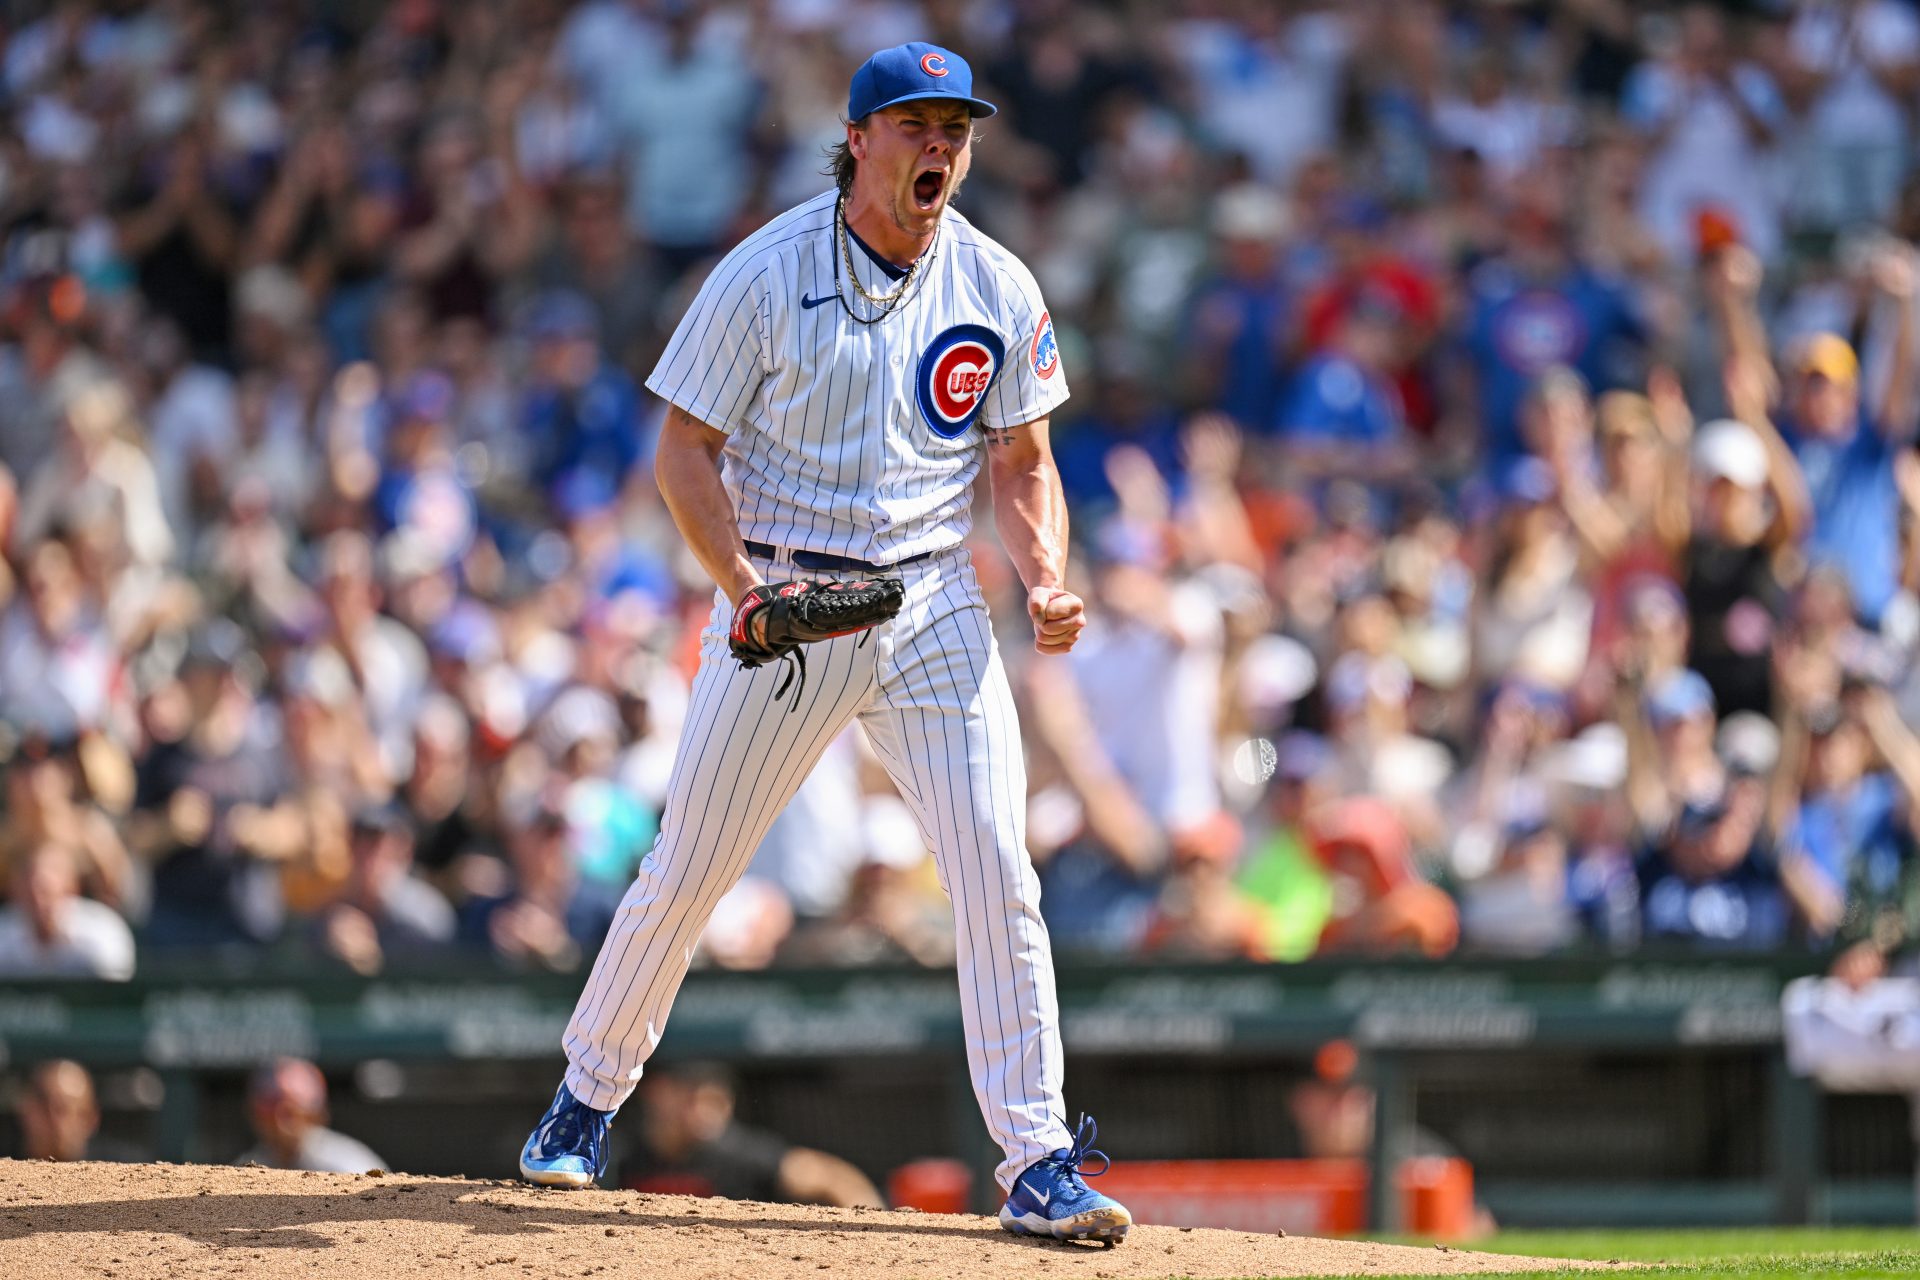 15. Justin Steele, Chicago Cubs